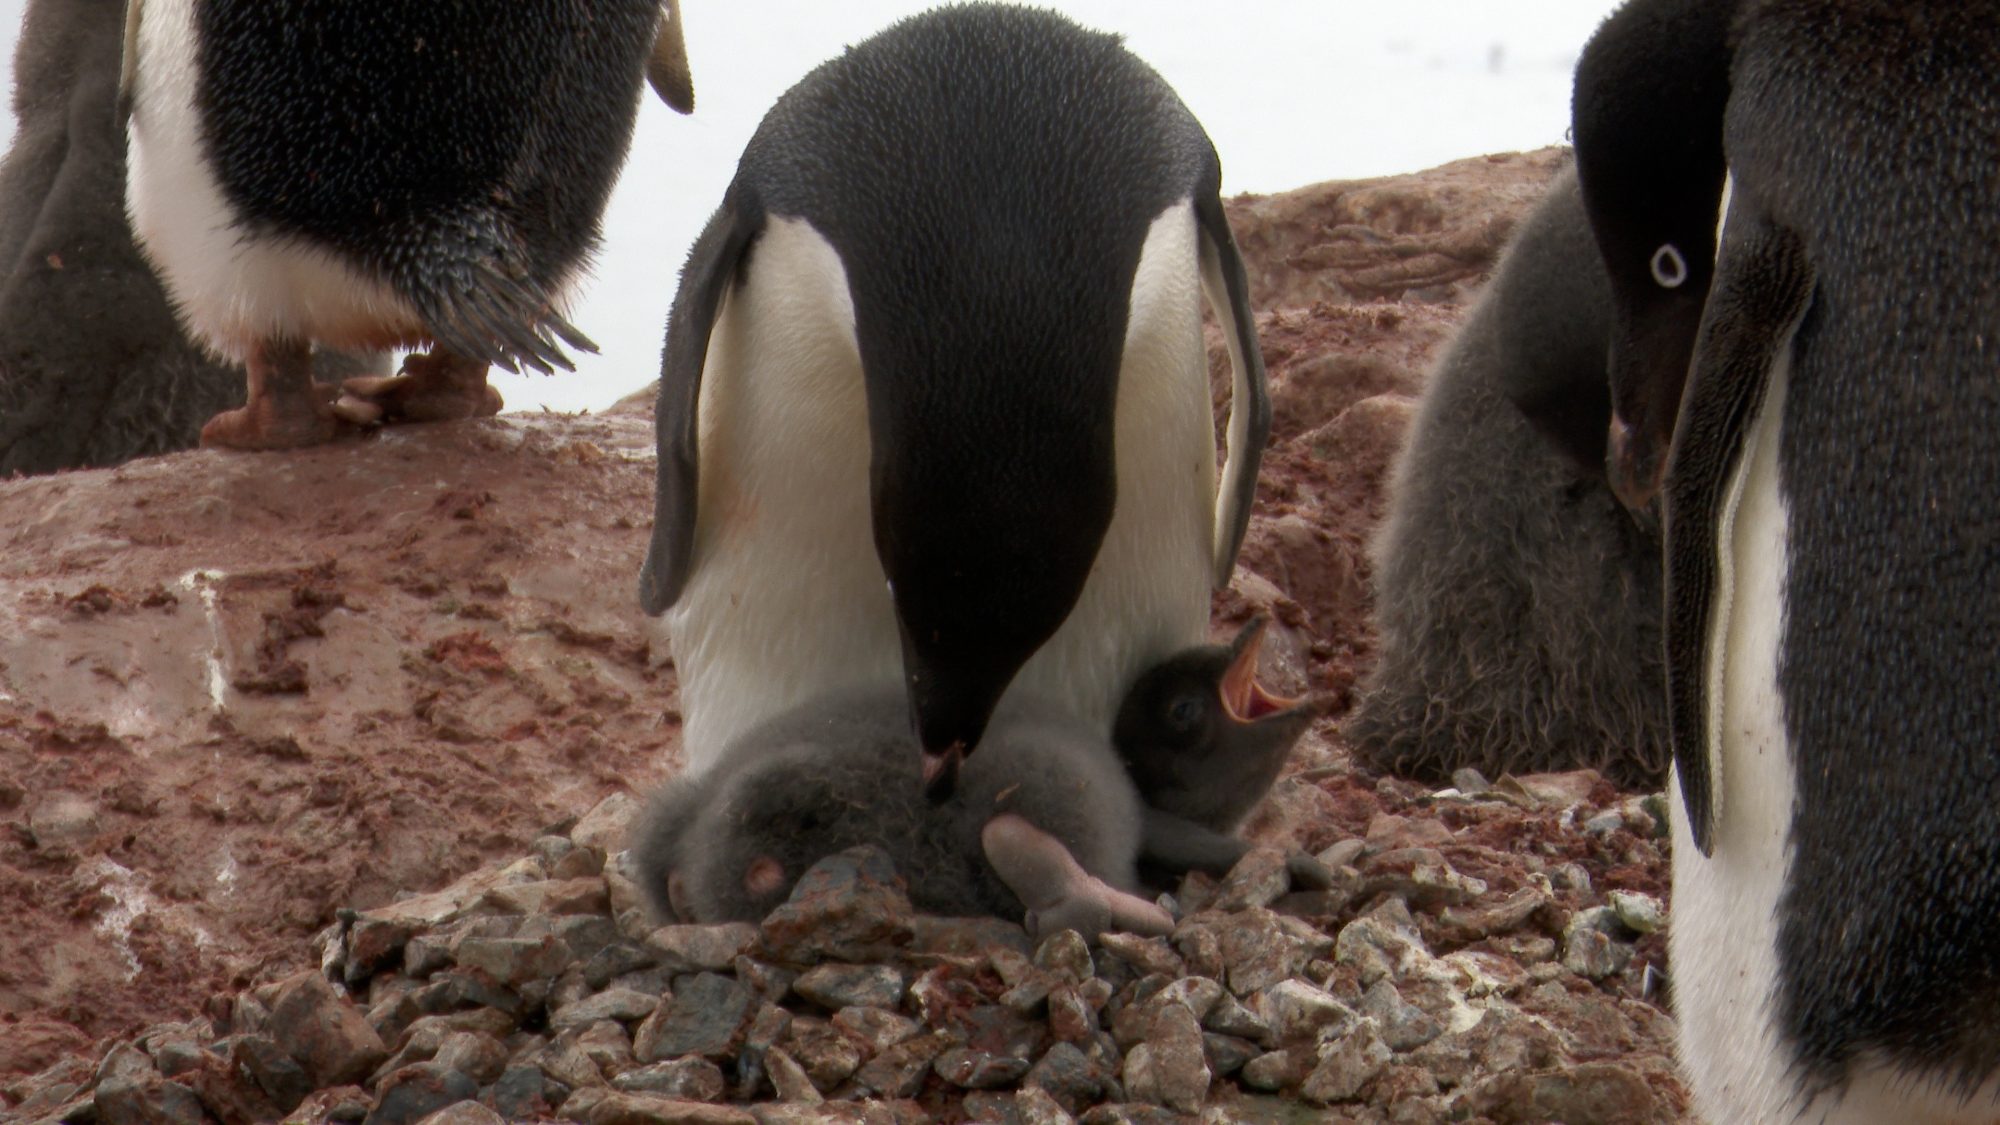 Adelie penguins and their chicks – Antarctica, 2020